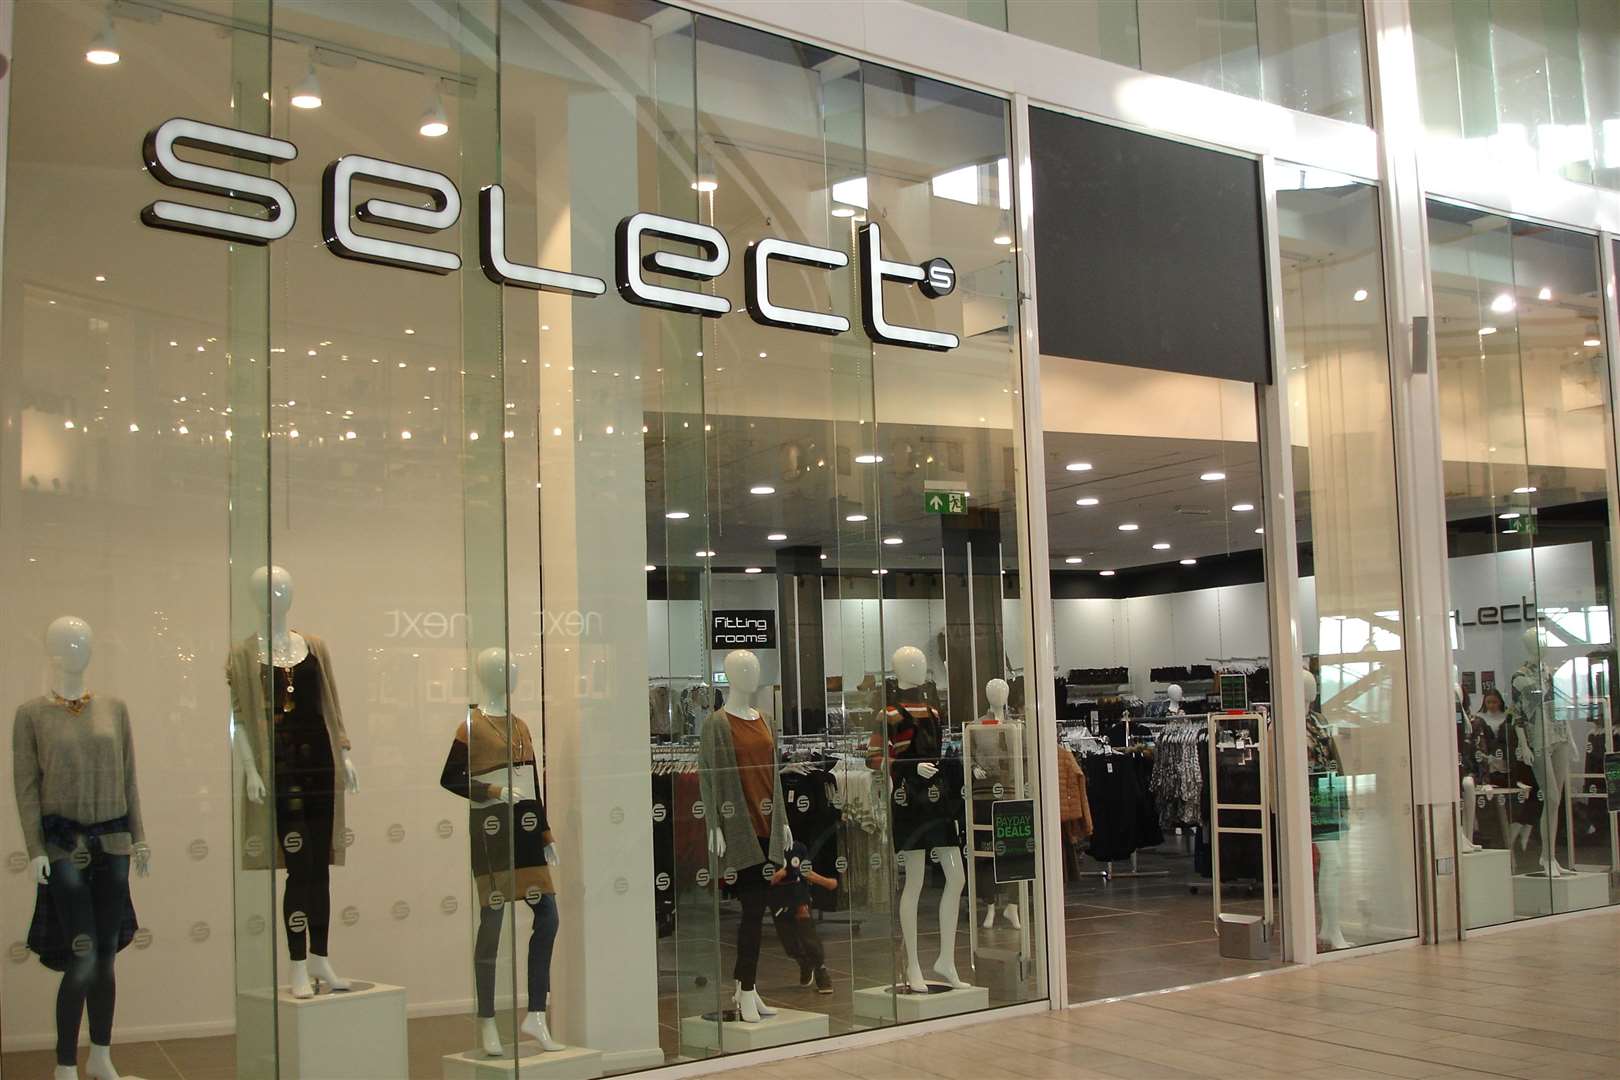 Select has 169 stores nationwide and employs some 1,800 staff